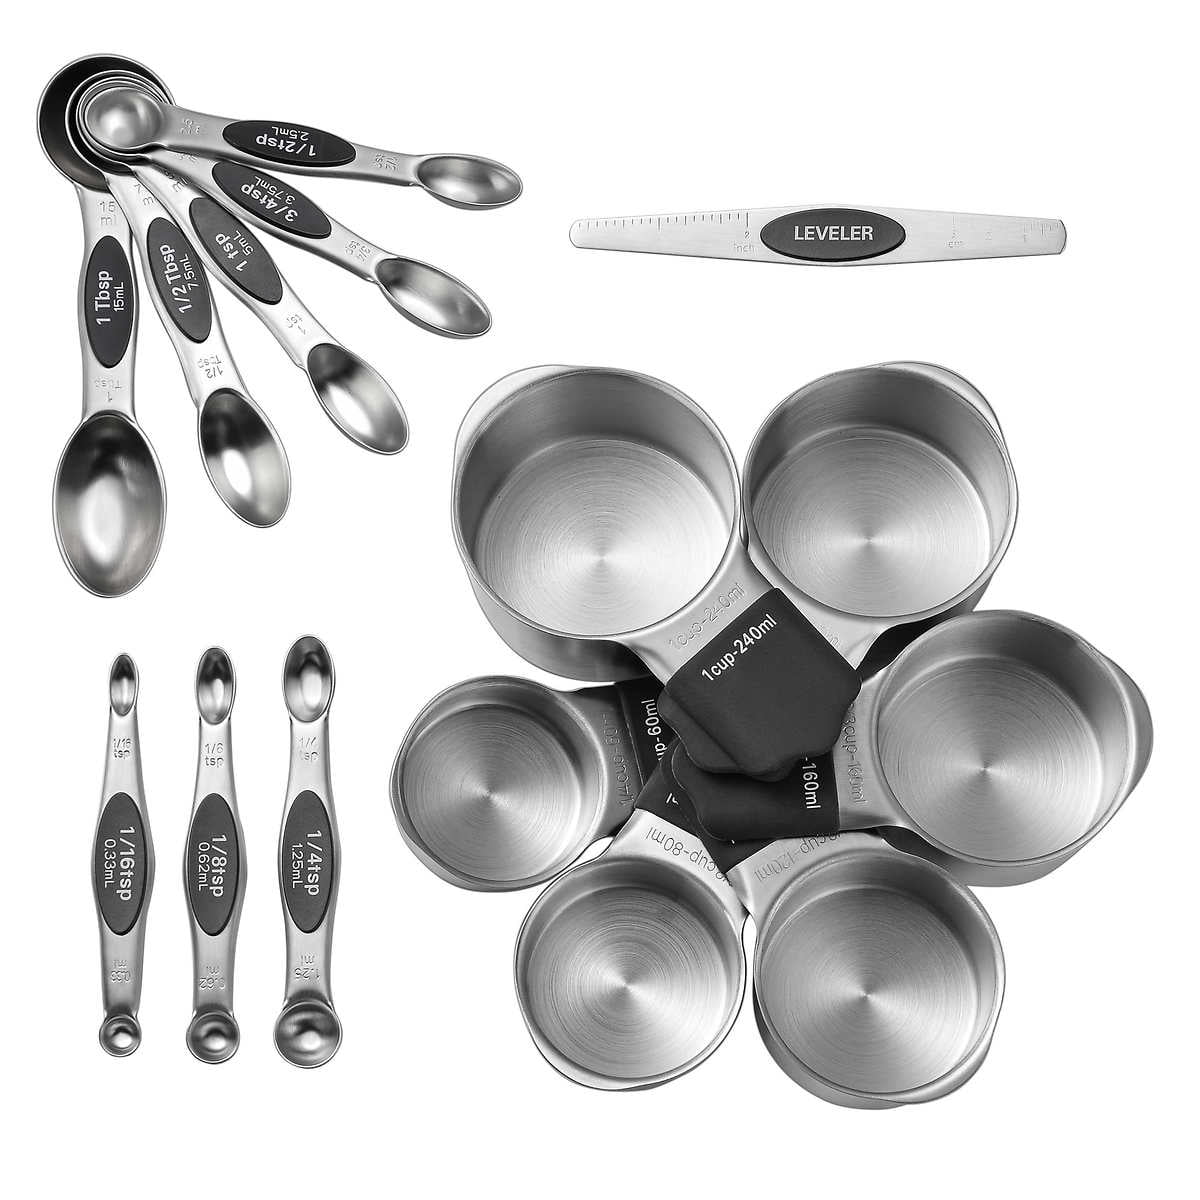 Nstezrne Measuring Cups Set of 5, Stainless Steel Measuring Cups